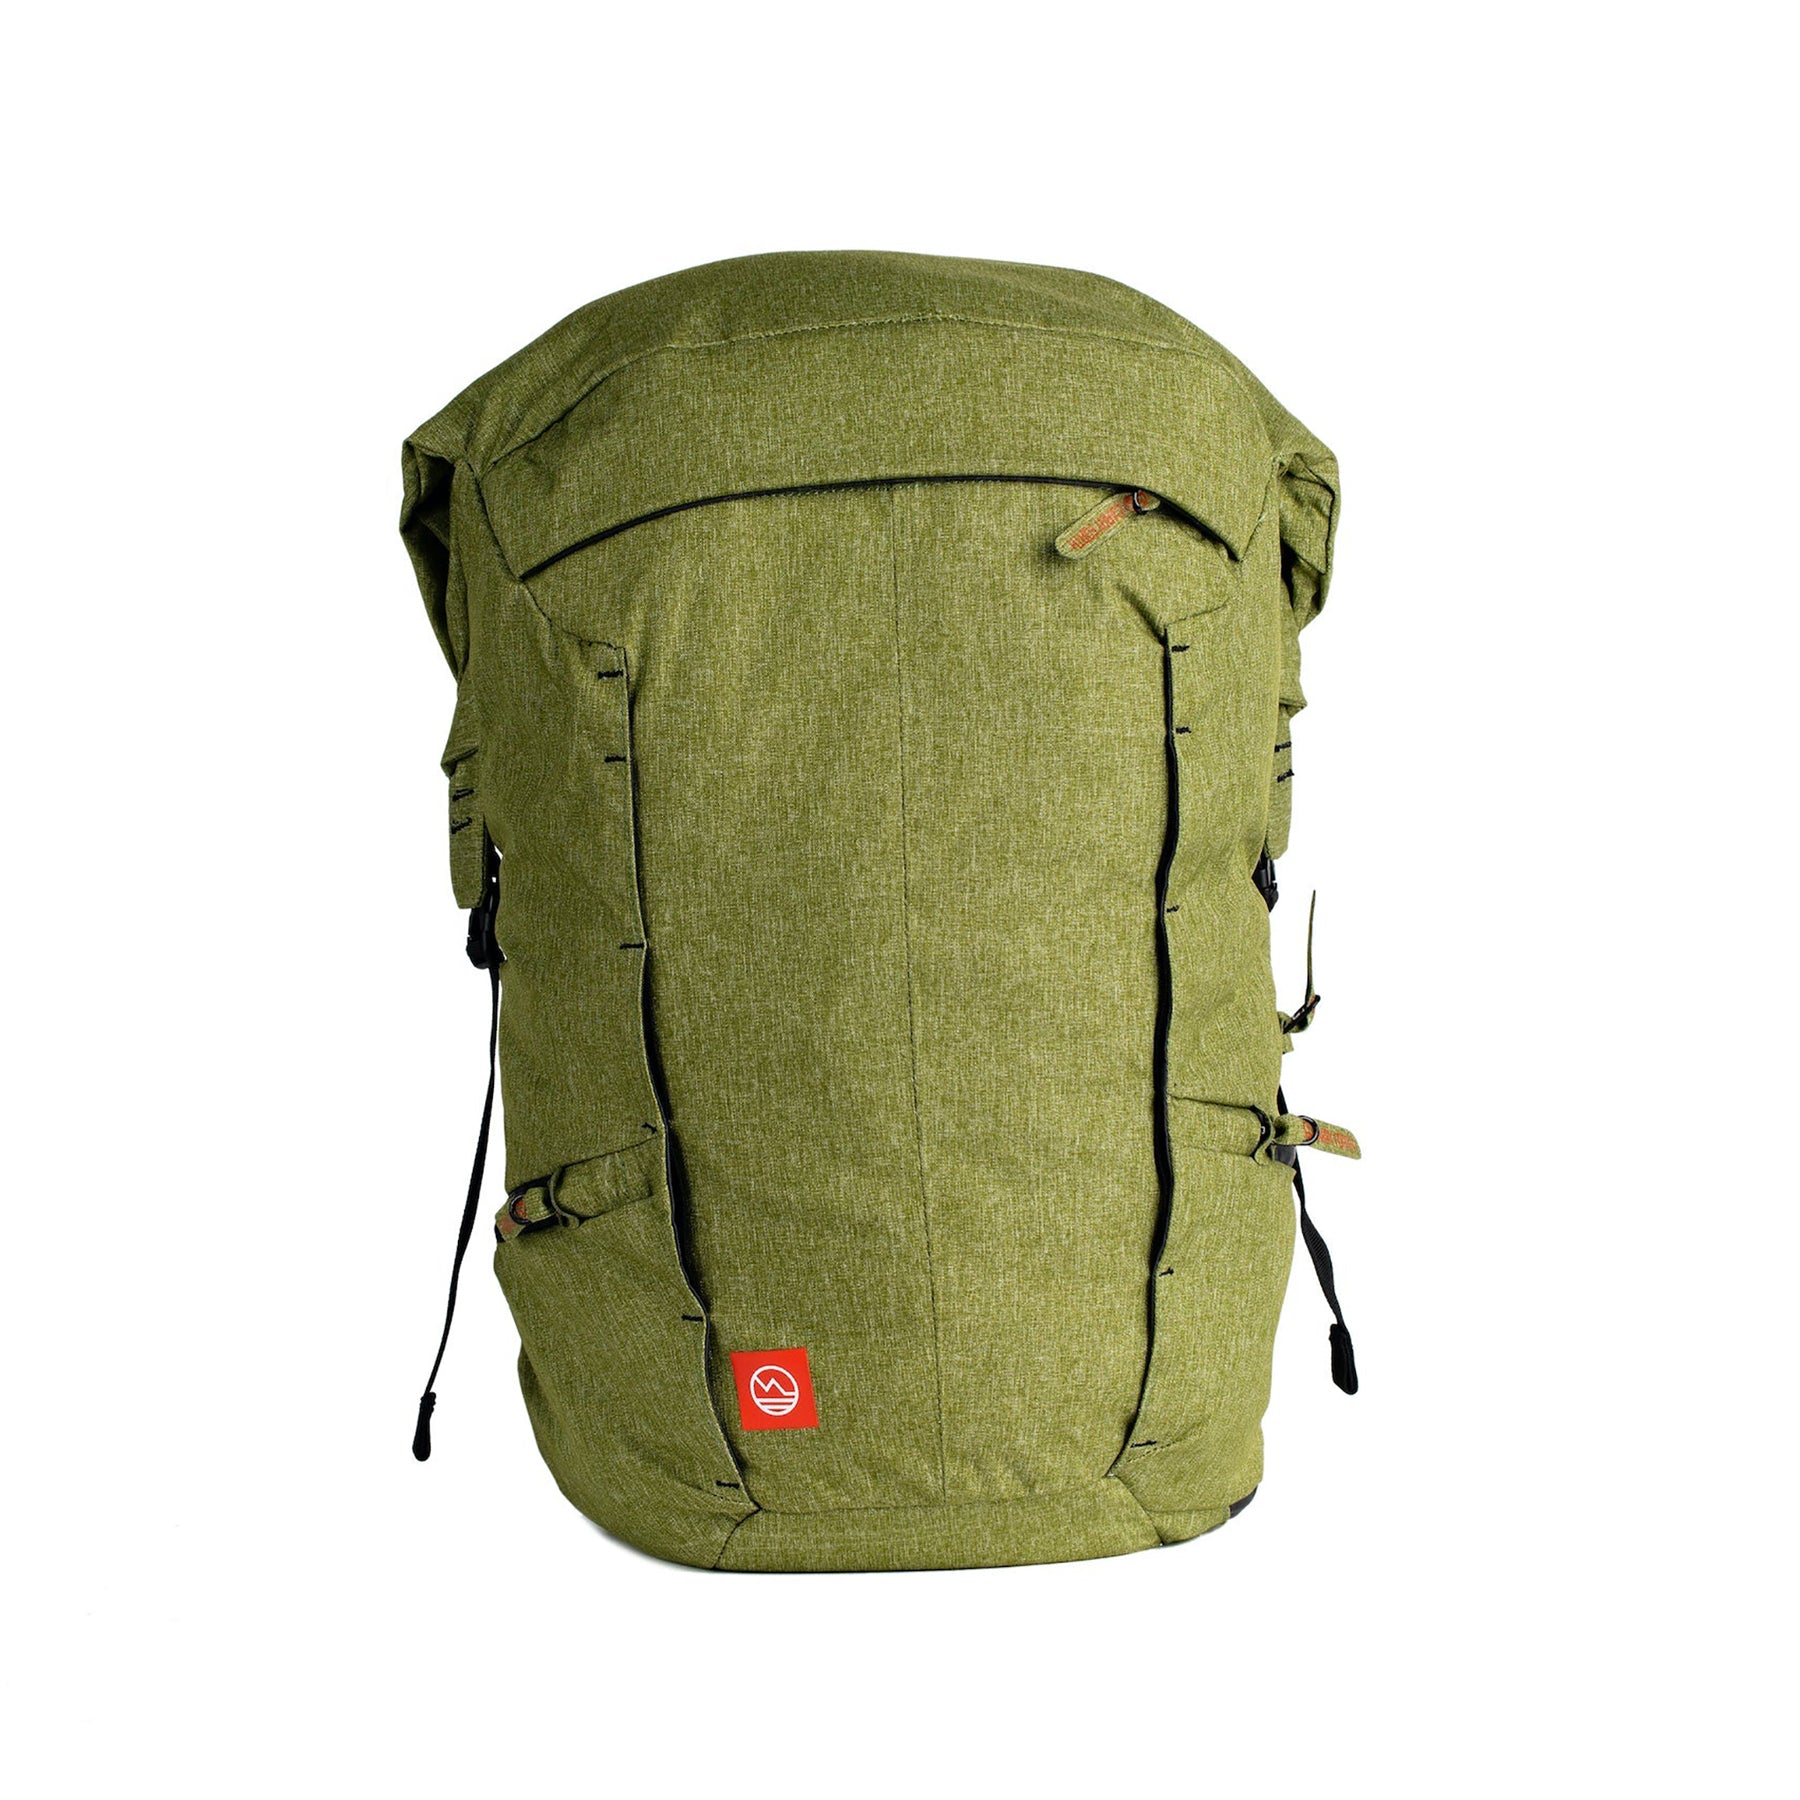 Hero image of Forest Green Tahquitz 2.0 Pack with Be Horizon Logo on the front bottom right panel.